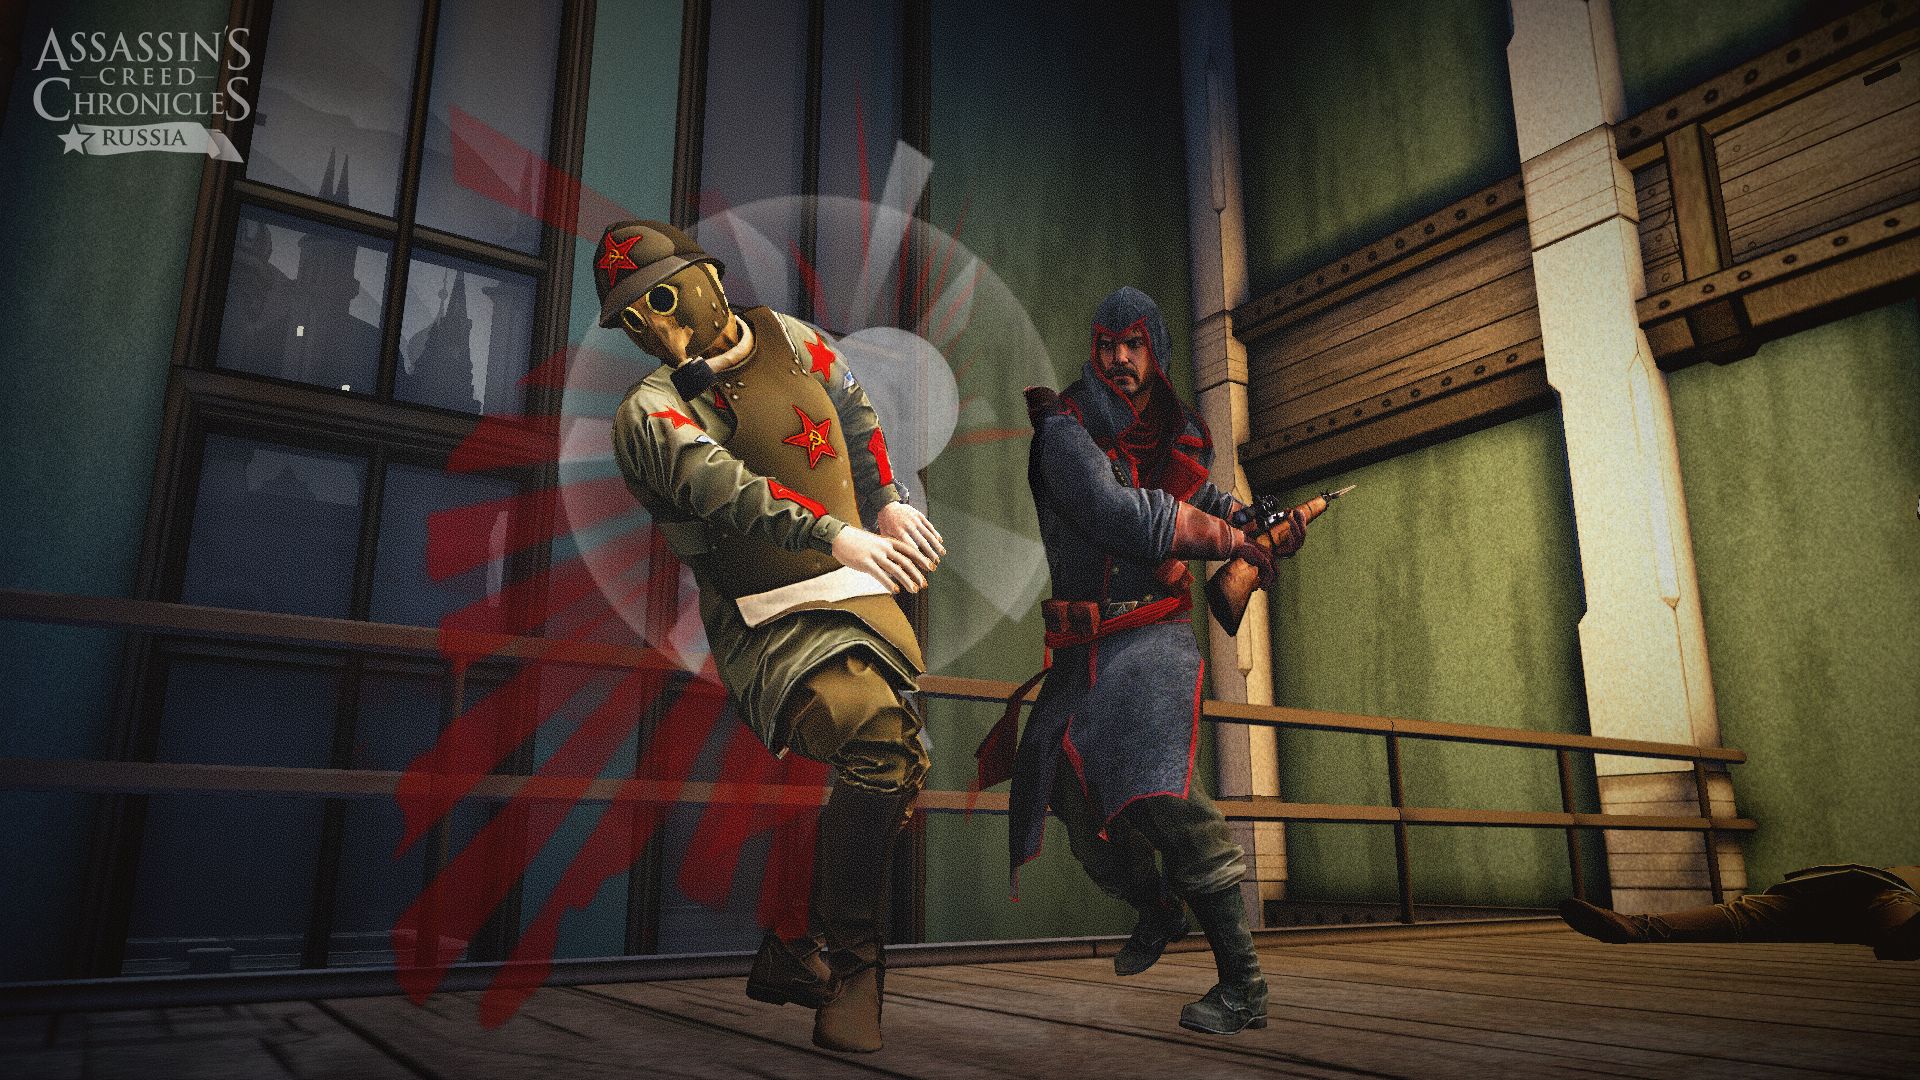 Assassin Creed Chronicles Russia - 1